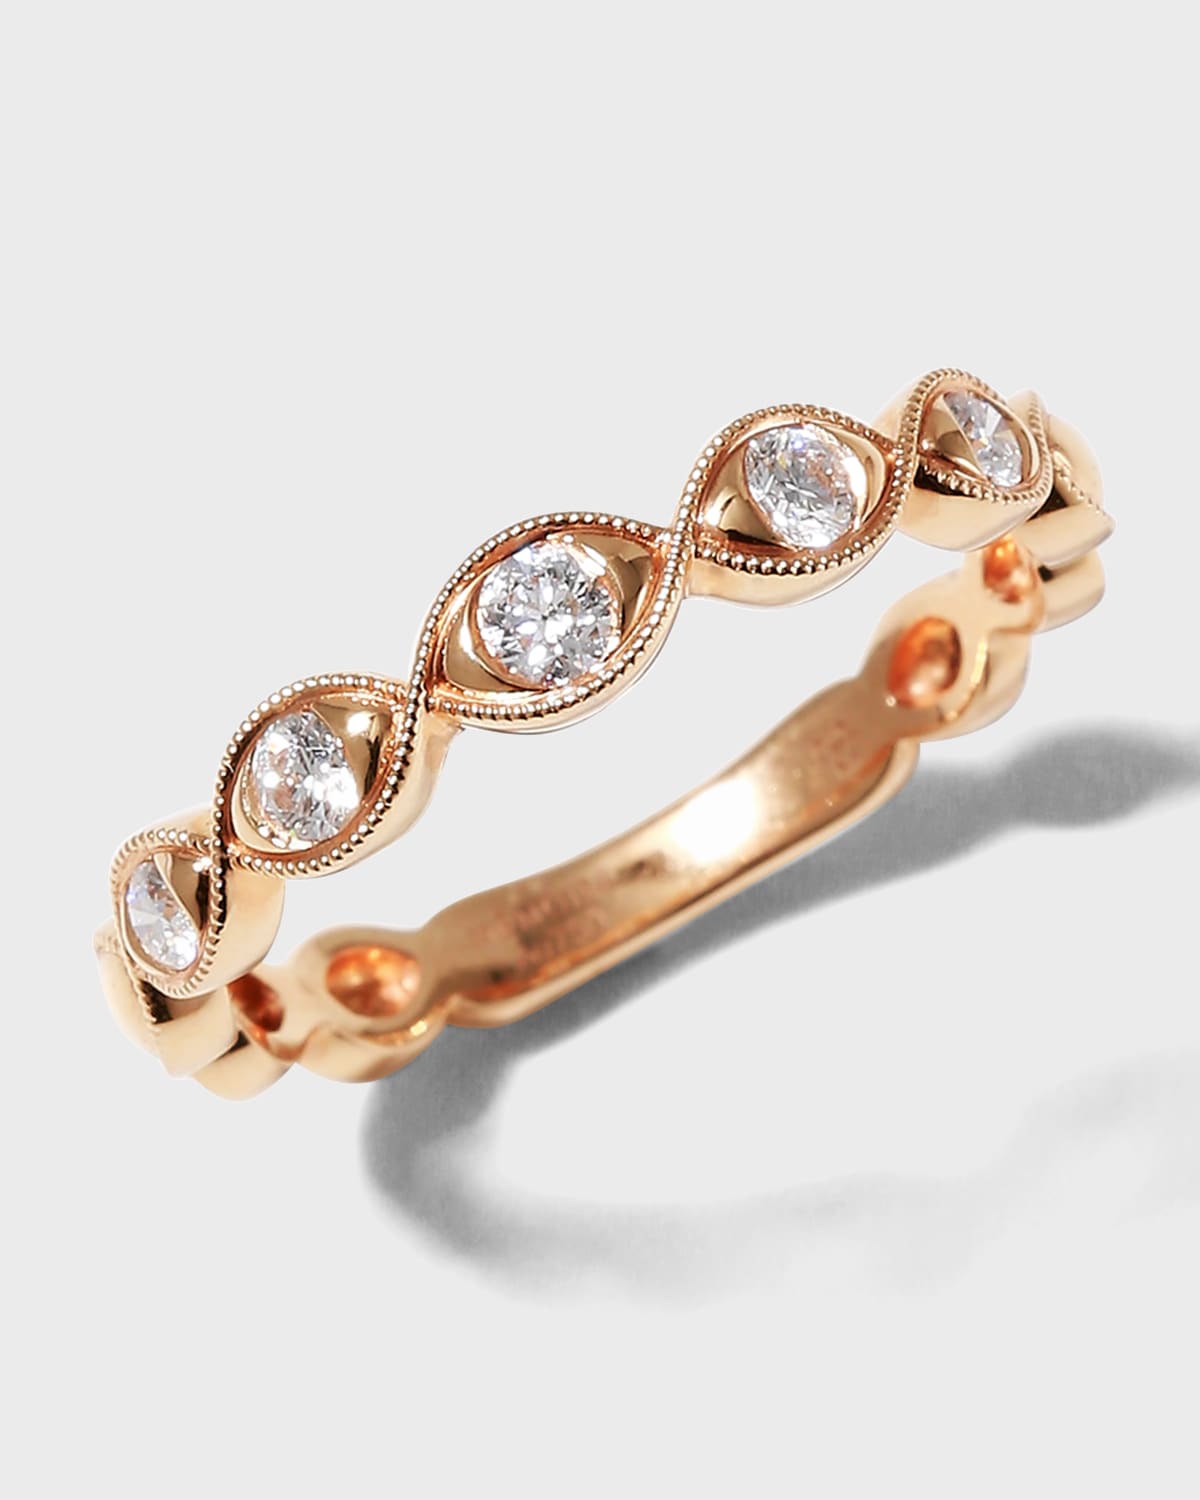 Memoire Stackables 18k Rose Gold Diamond Marquise Ring, Size 6.5